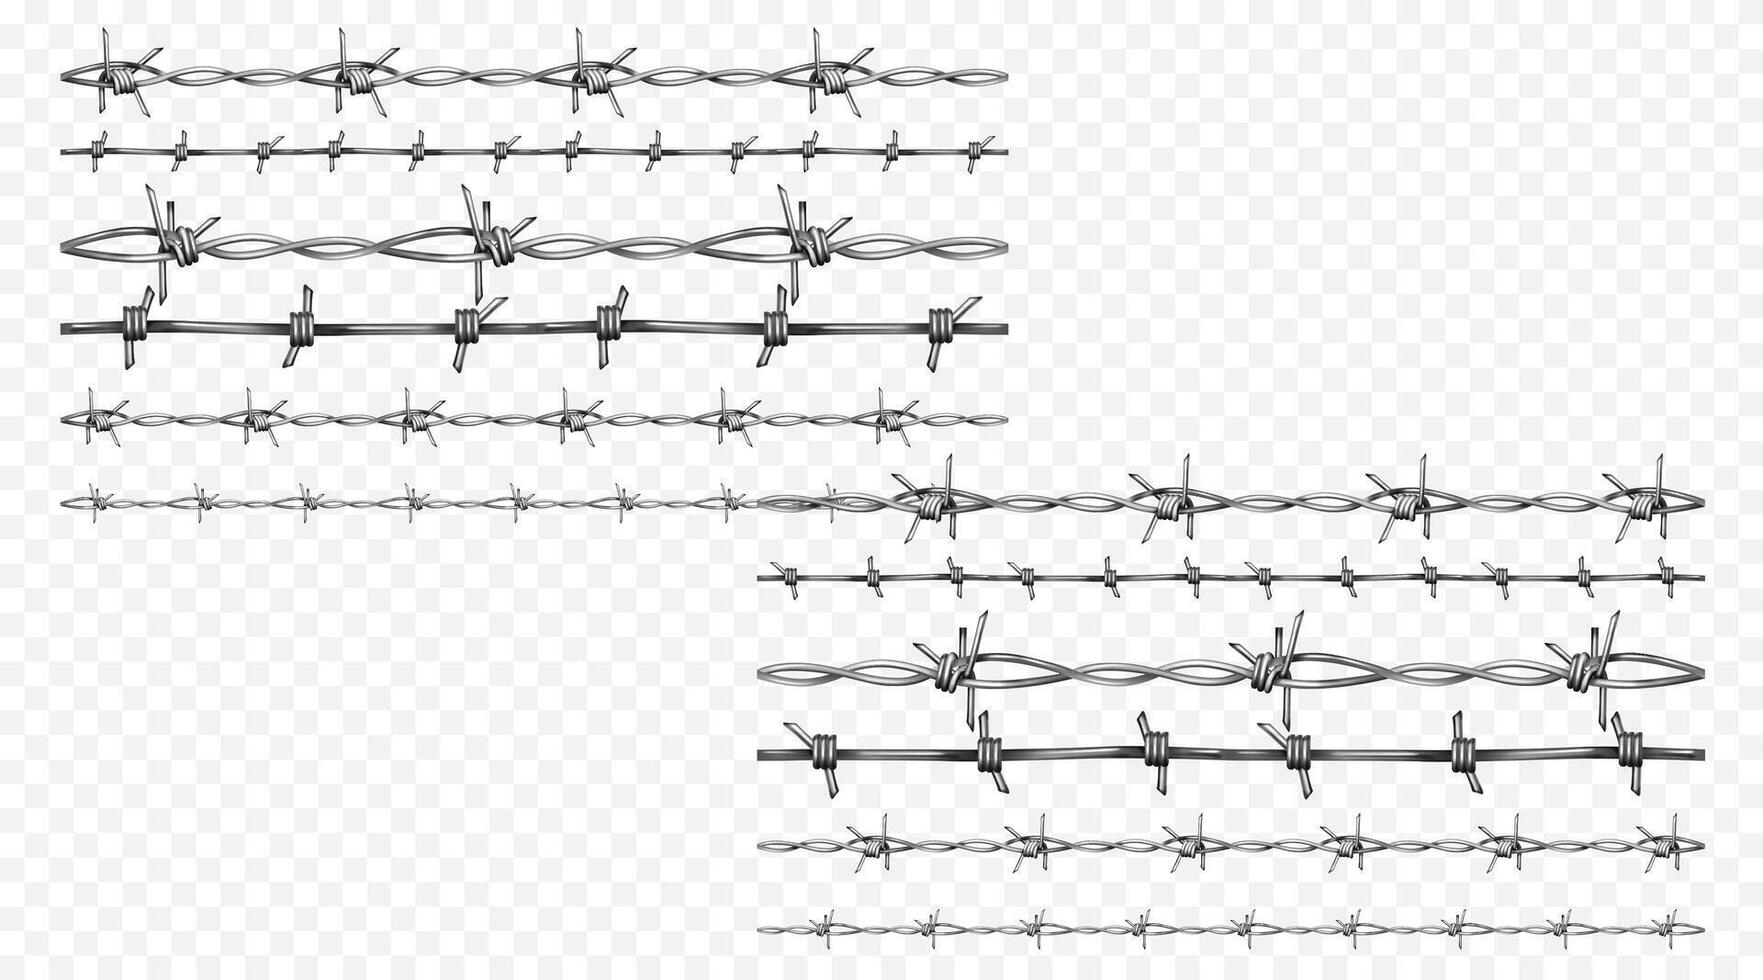 barbed barb wire illustration seamless realistic 3d metallic fence wires with sharp edge vector